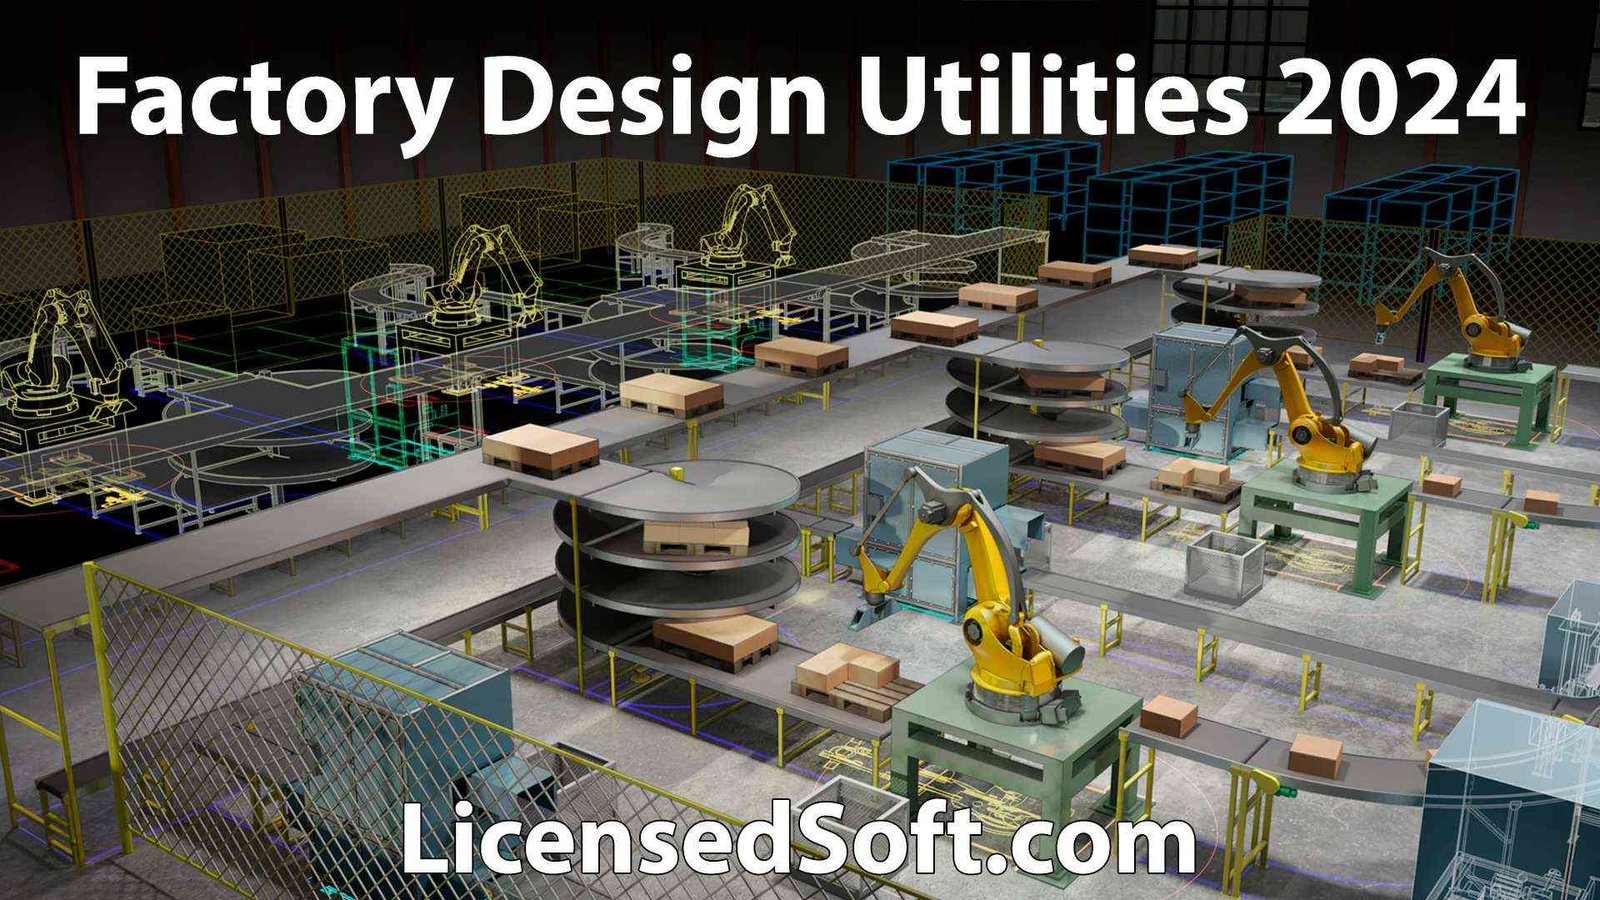 Autodesk Factory Design Utilities 2024 Cover Image By LicensedSoft